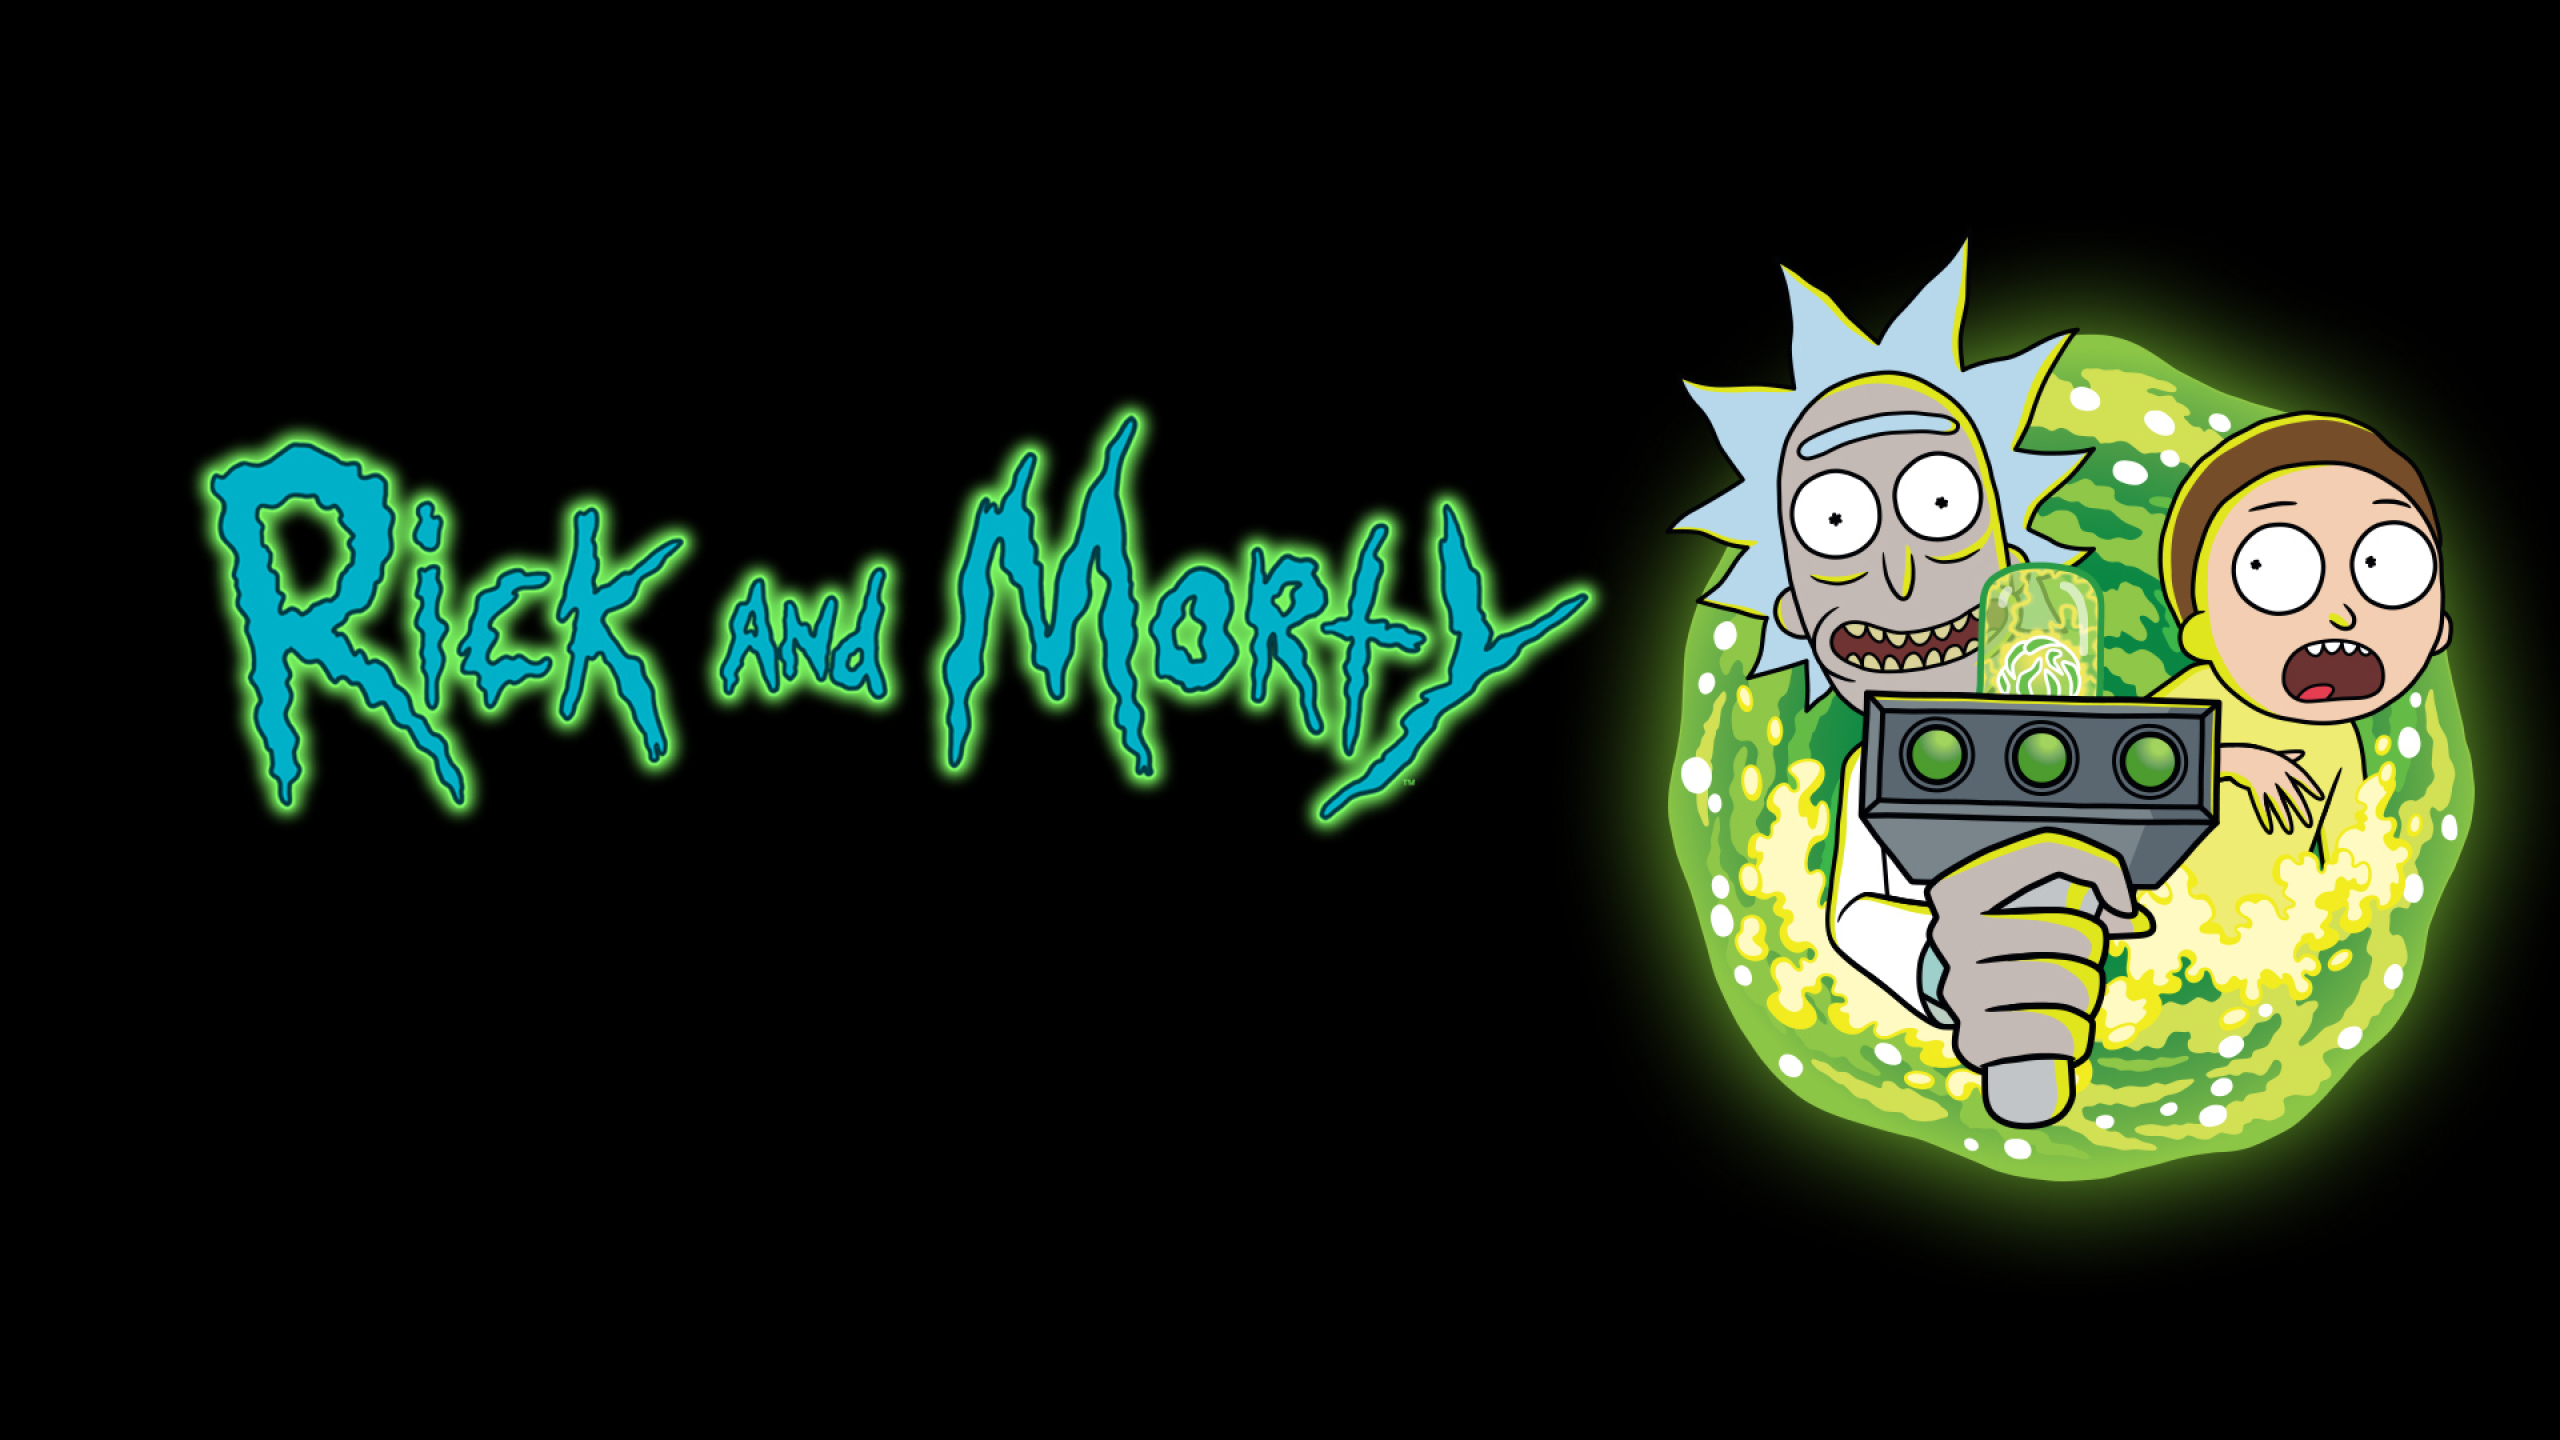 2560x1440 Resolution Rick And Morty Tv Poster 1440p Resolution Wallpaper Wallpapers Den